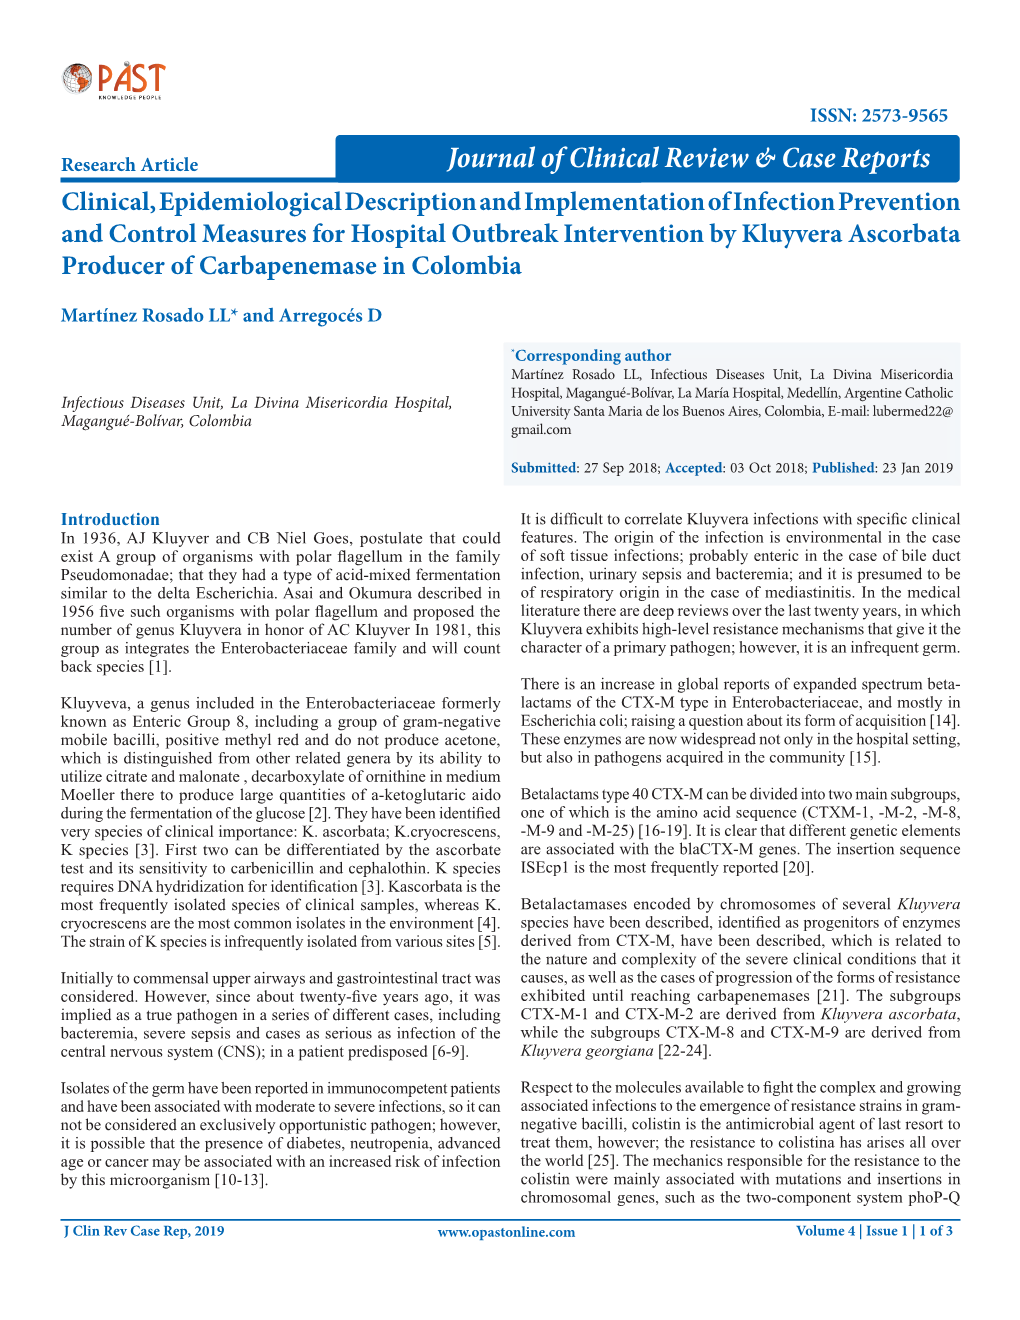 Clinical, Epidemiological Description and Implementation of Infection